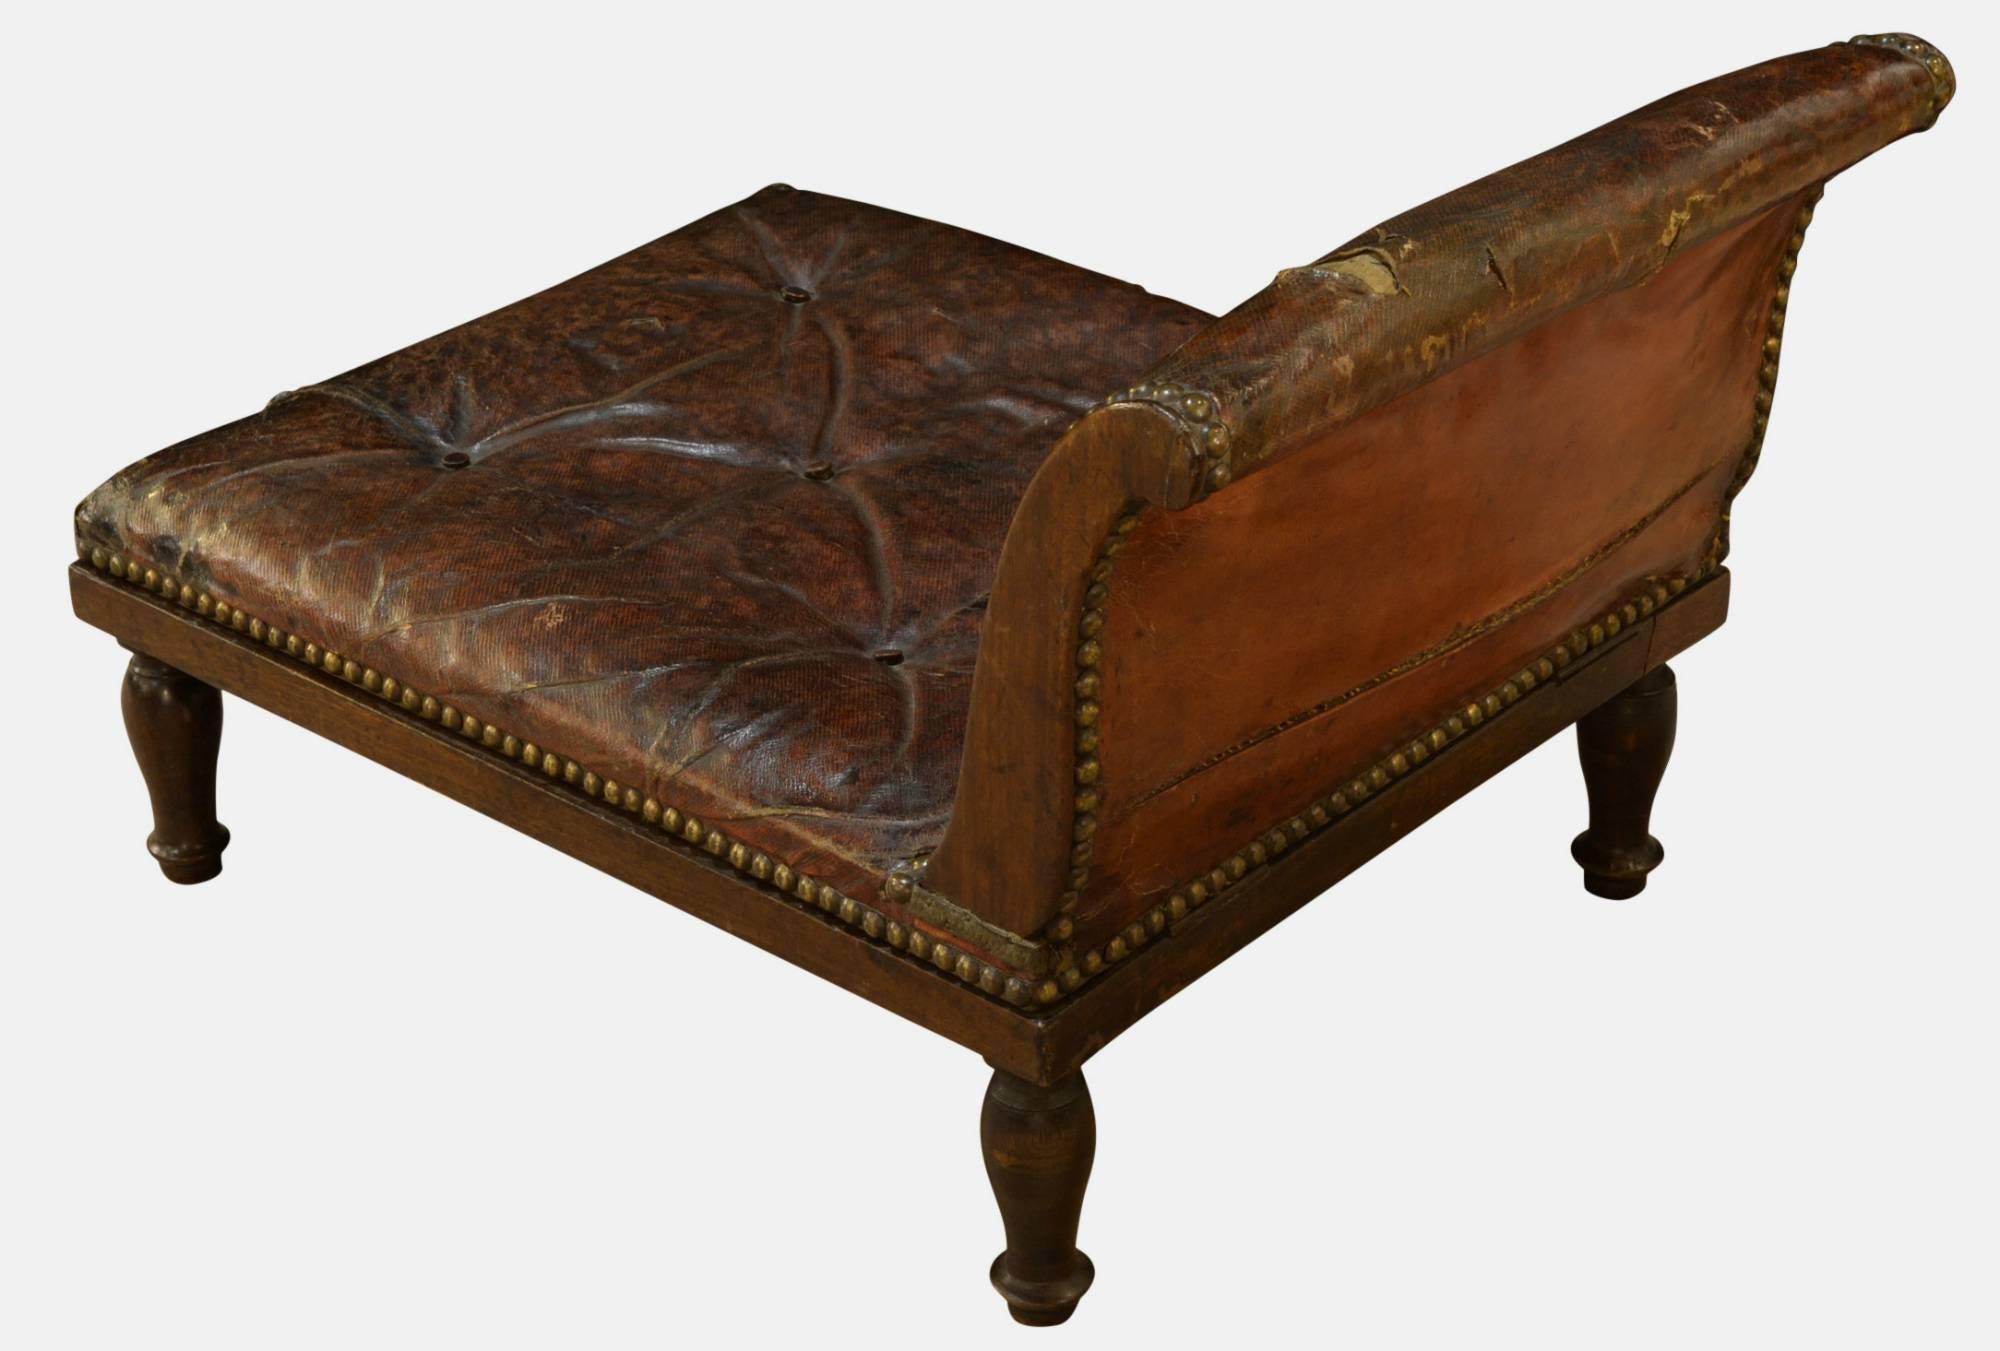 Georgian mahogany gout stool with original leather upholstery.